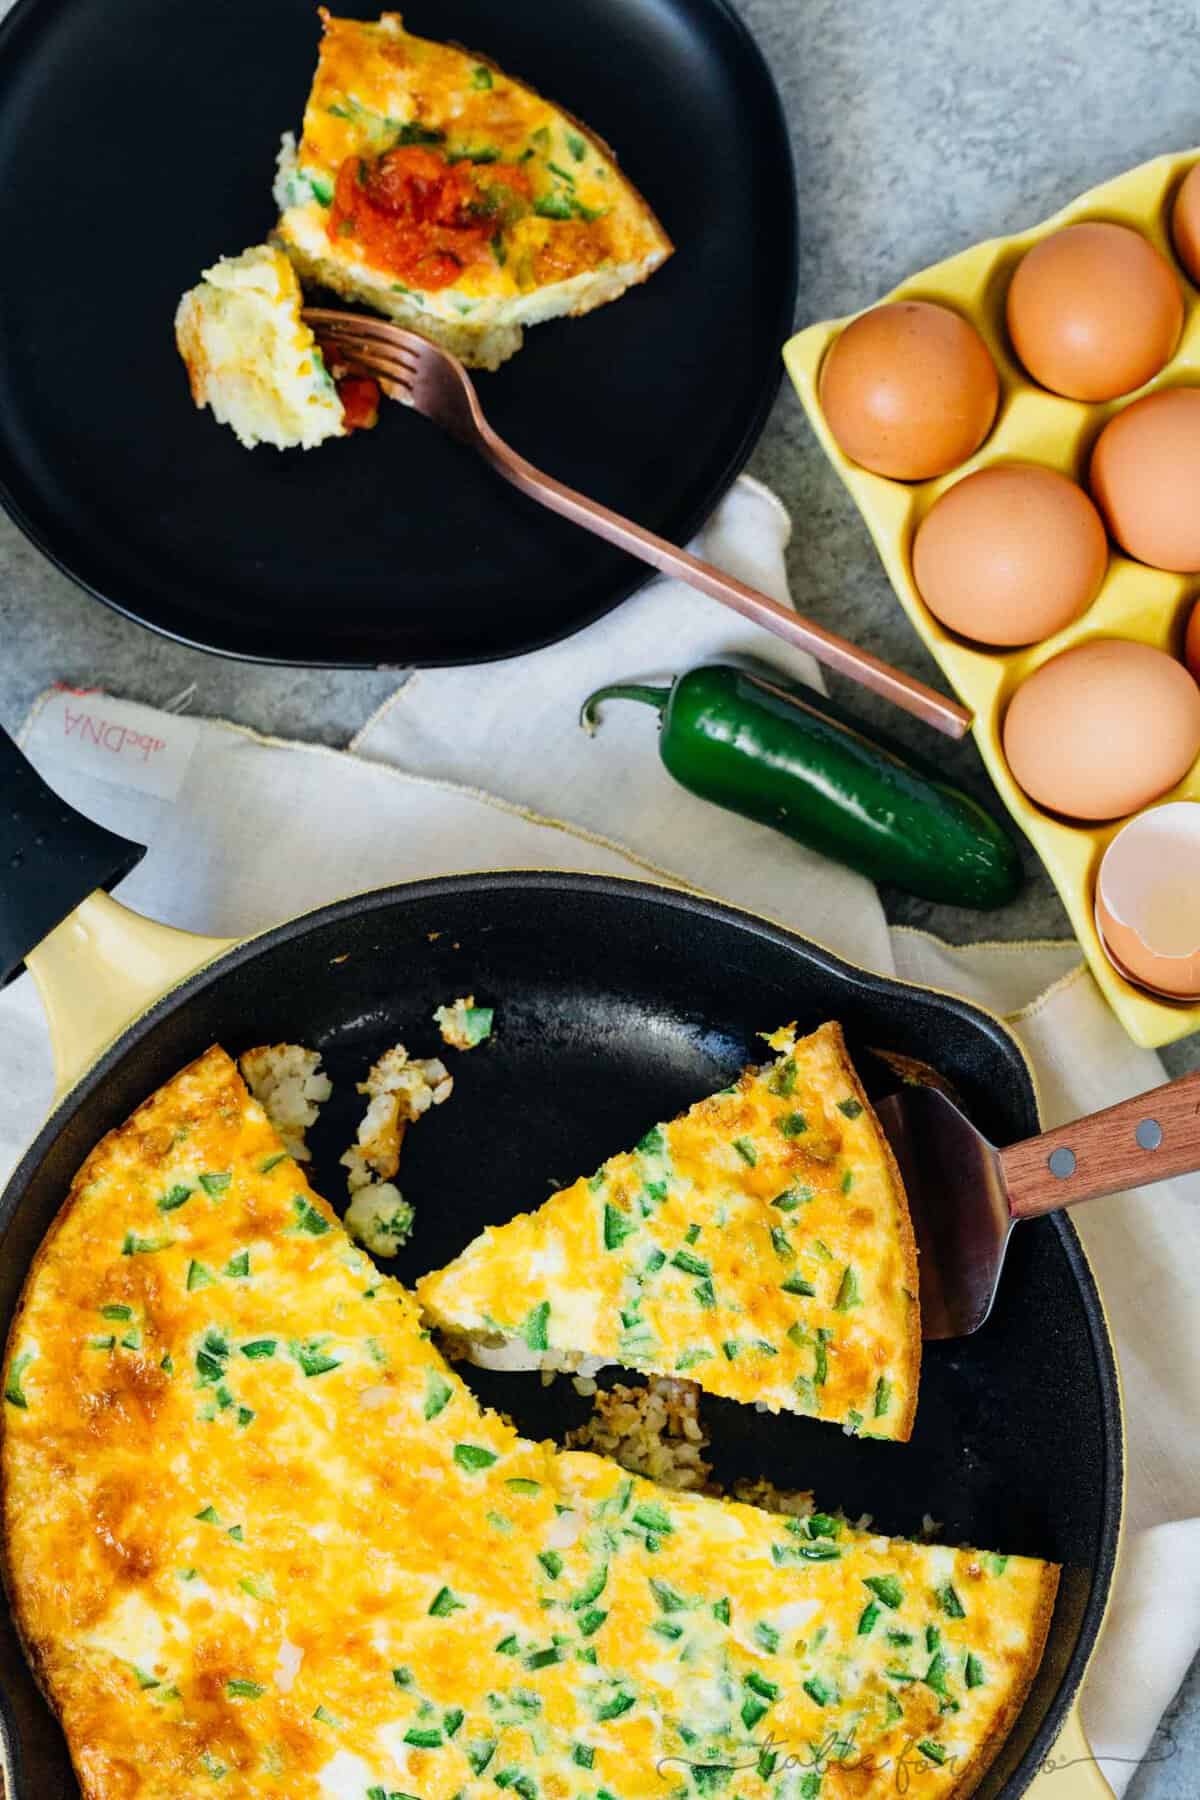 Overhead view of a slice of tater tot egg frittata next to the rest of a frittata in a cast iron skillet, next to another slice of frittata on a black plate and a carton of eggs.